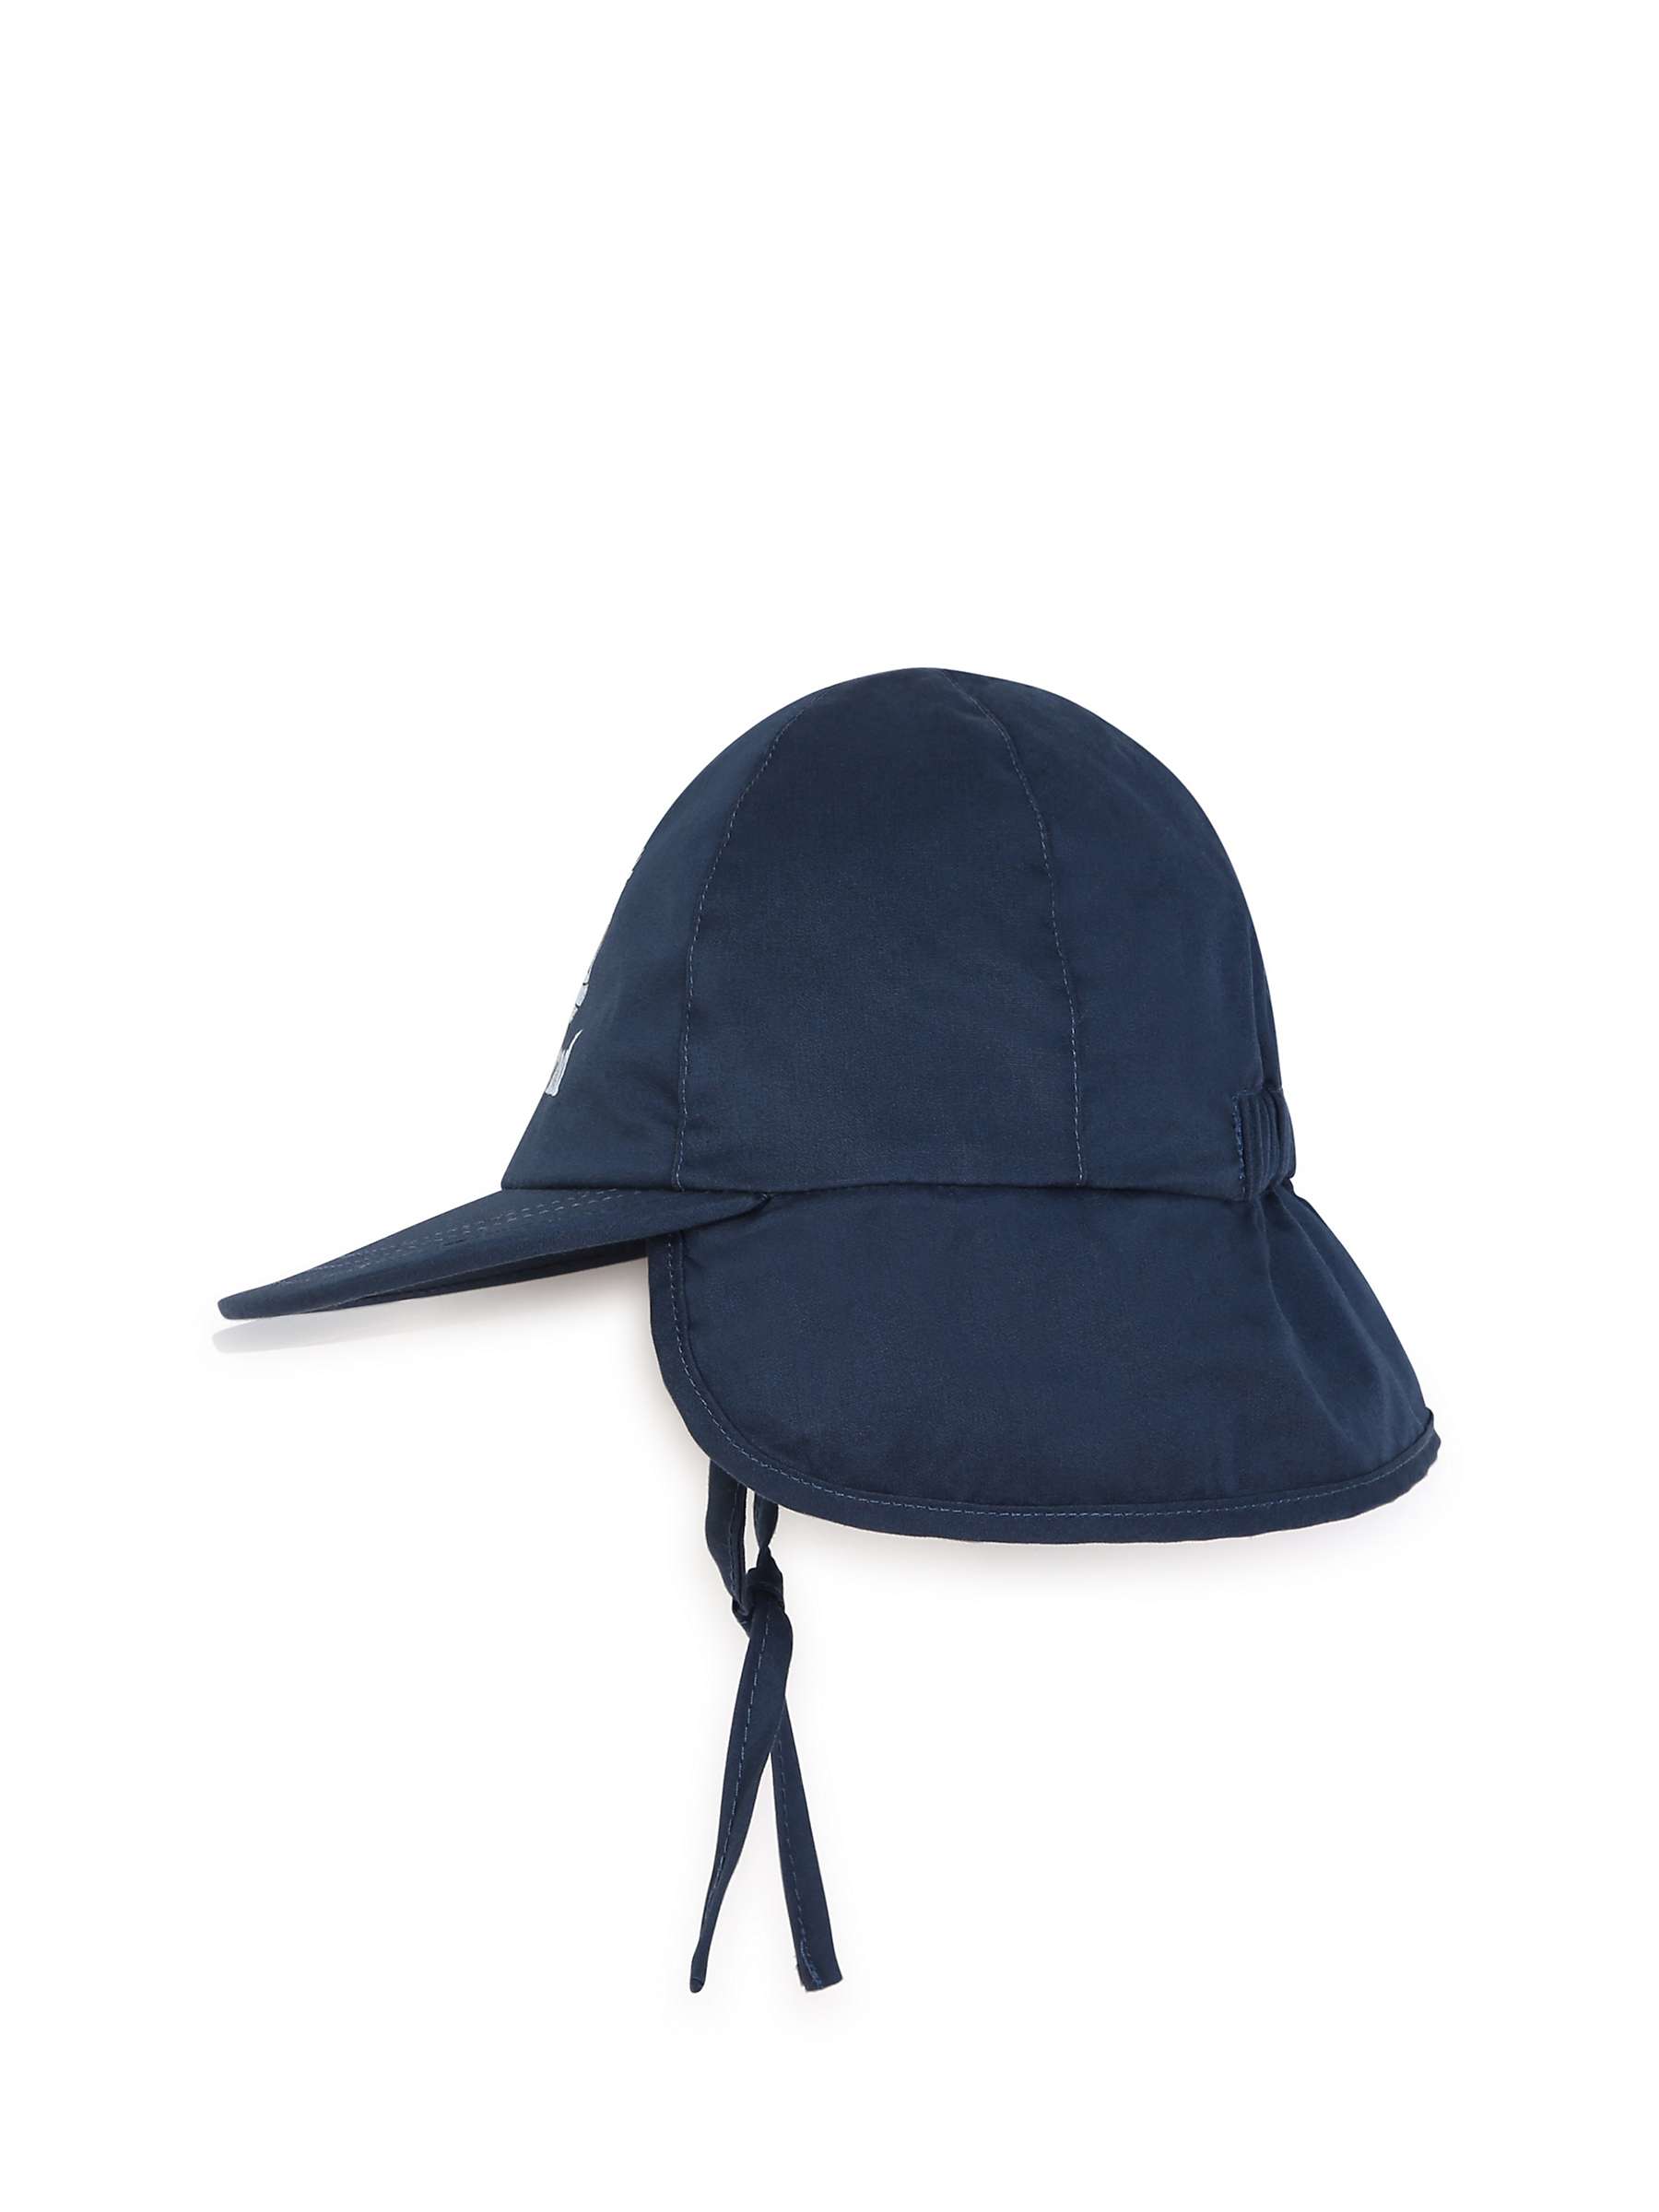 Buy Timberland Baby Logo Neck Protection Cap, Navy/Multi Online at johnlewis.com